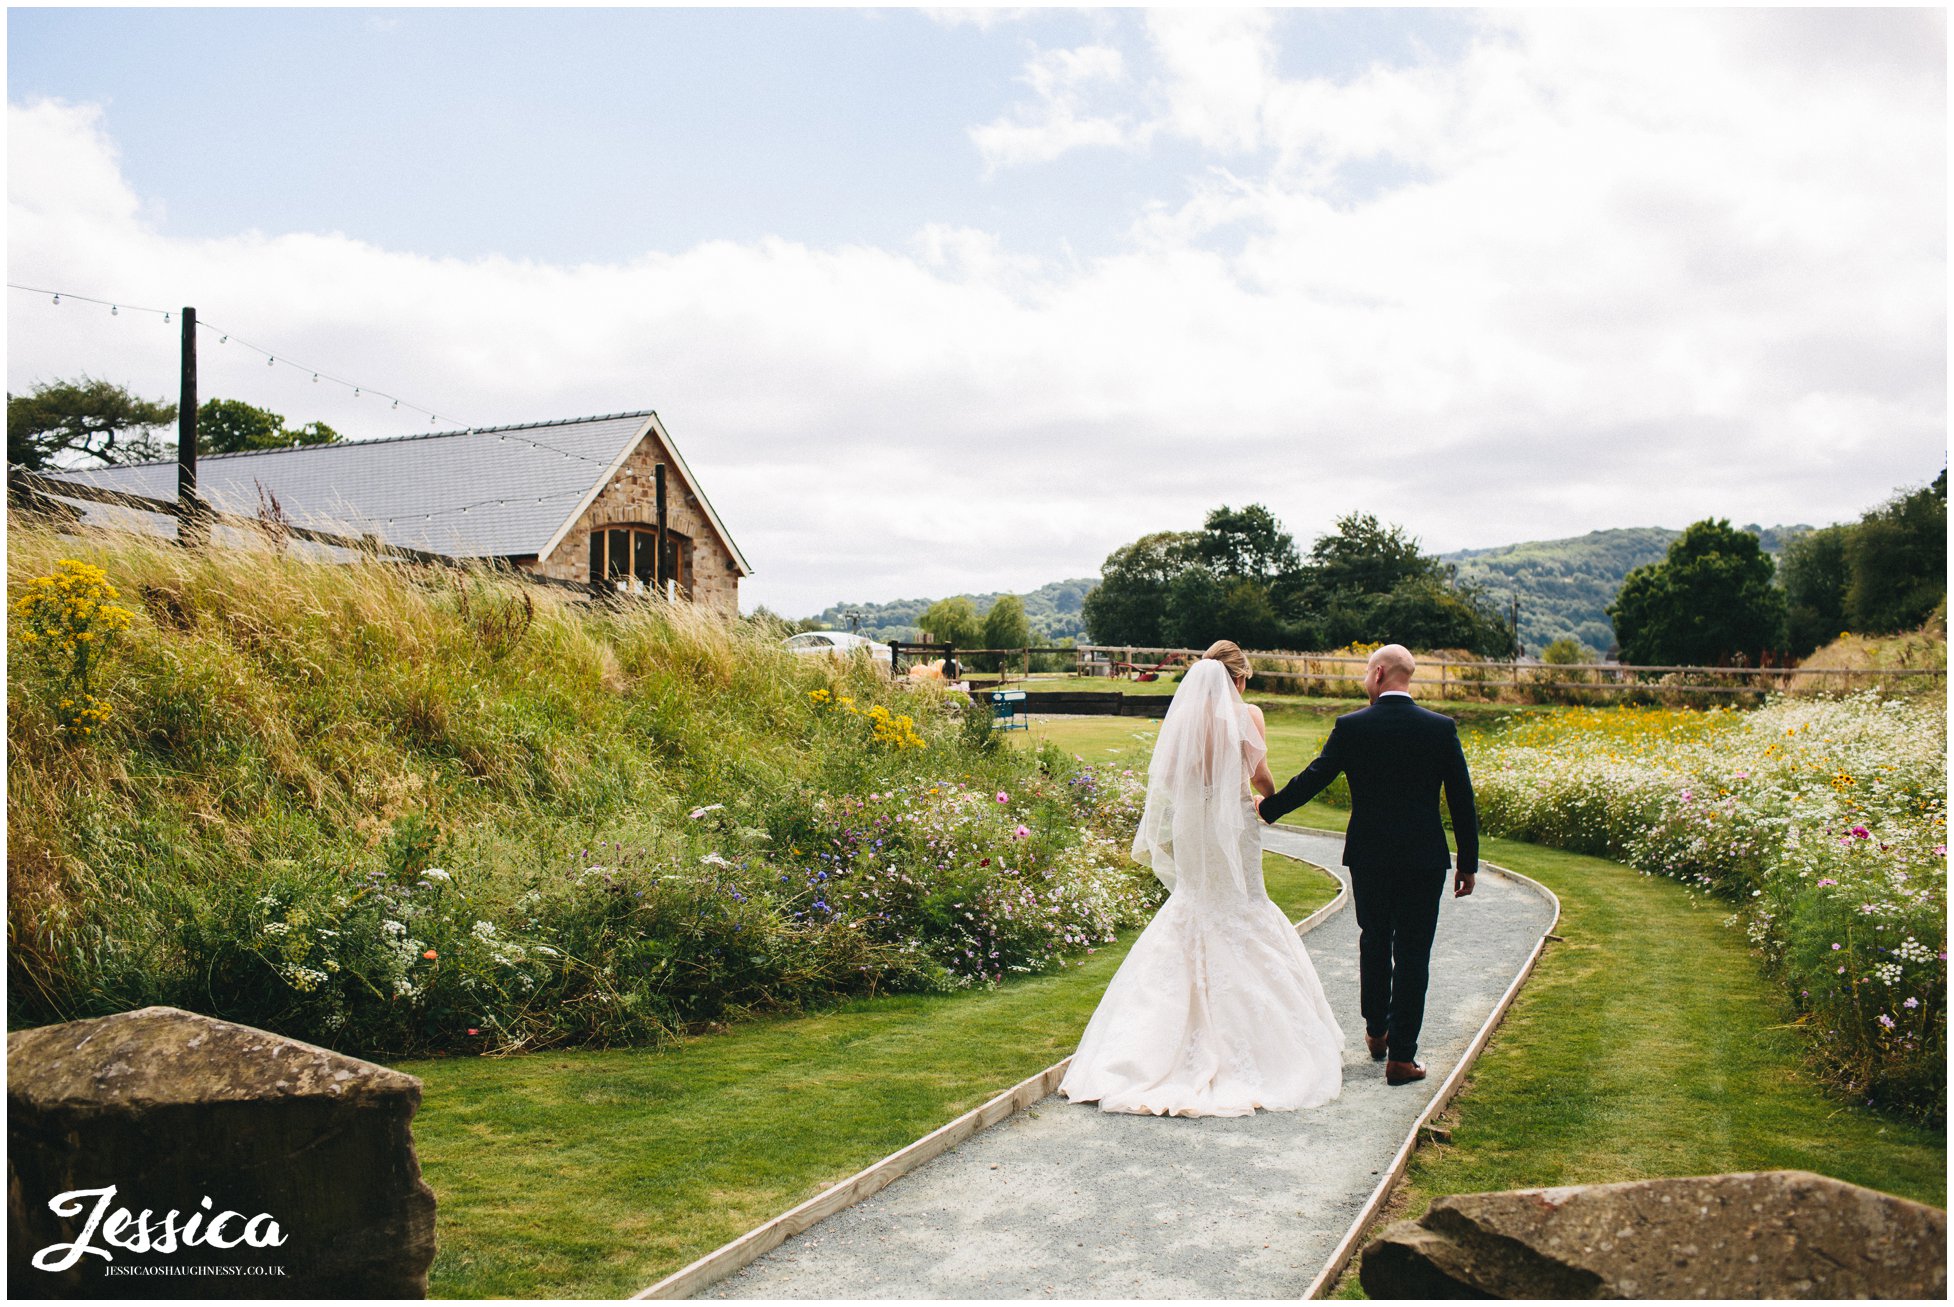 newly wed's walk down path after their wedding ceremony in north wales